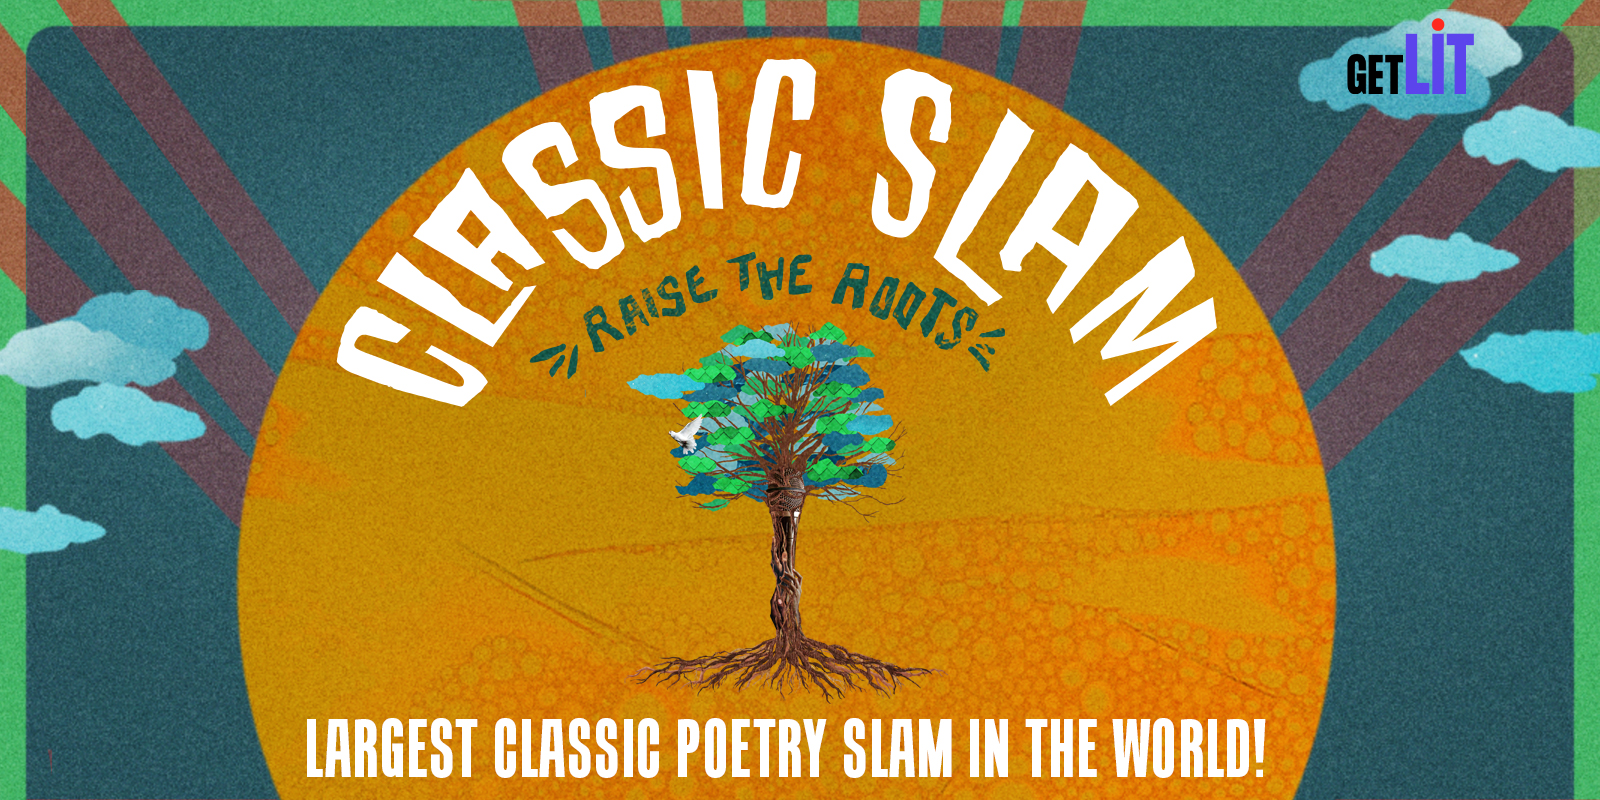 An image of the tree with a white dove on the left top branches, surrounded by the text "Classic Slam: raise the roots, largest classic poetry slam in the world! Pictured orange sun, surrounded by green, blue and red accents with clouds.